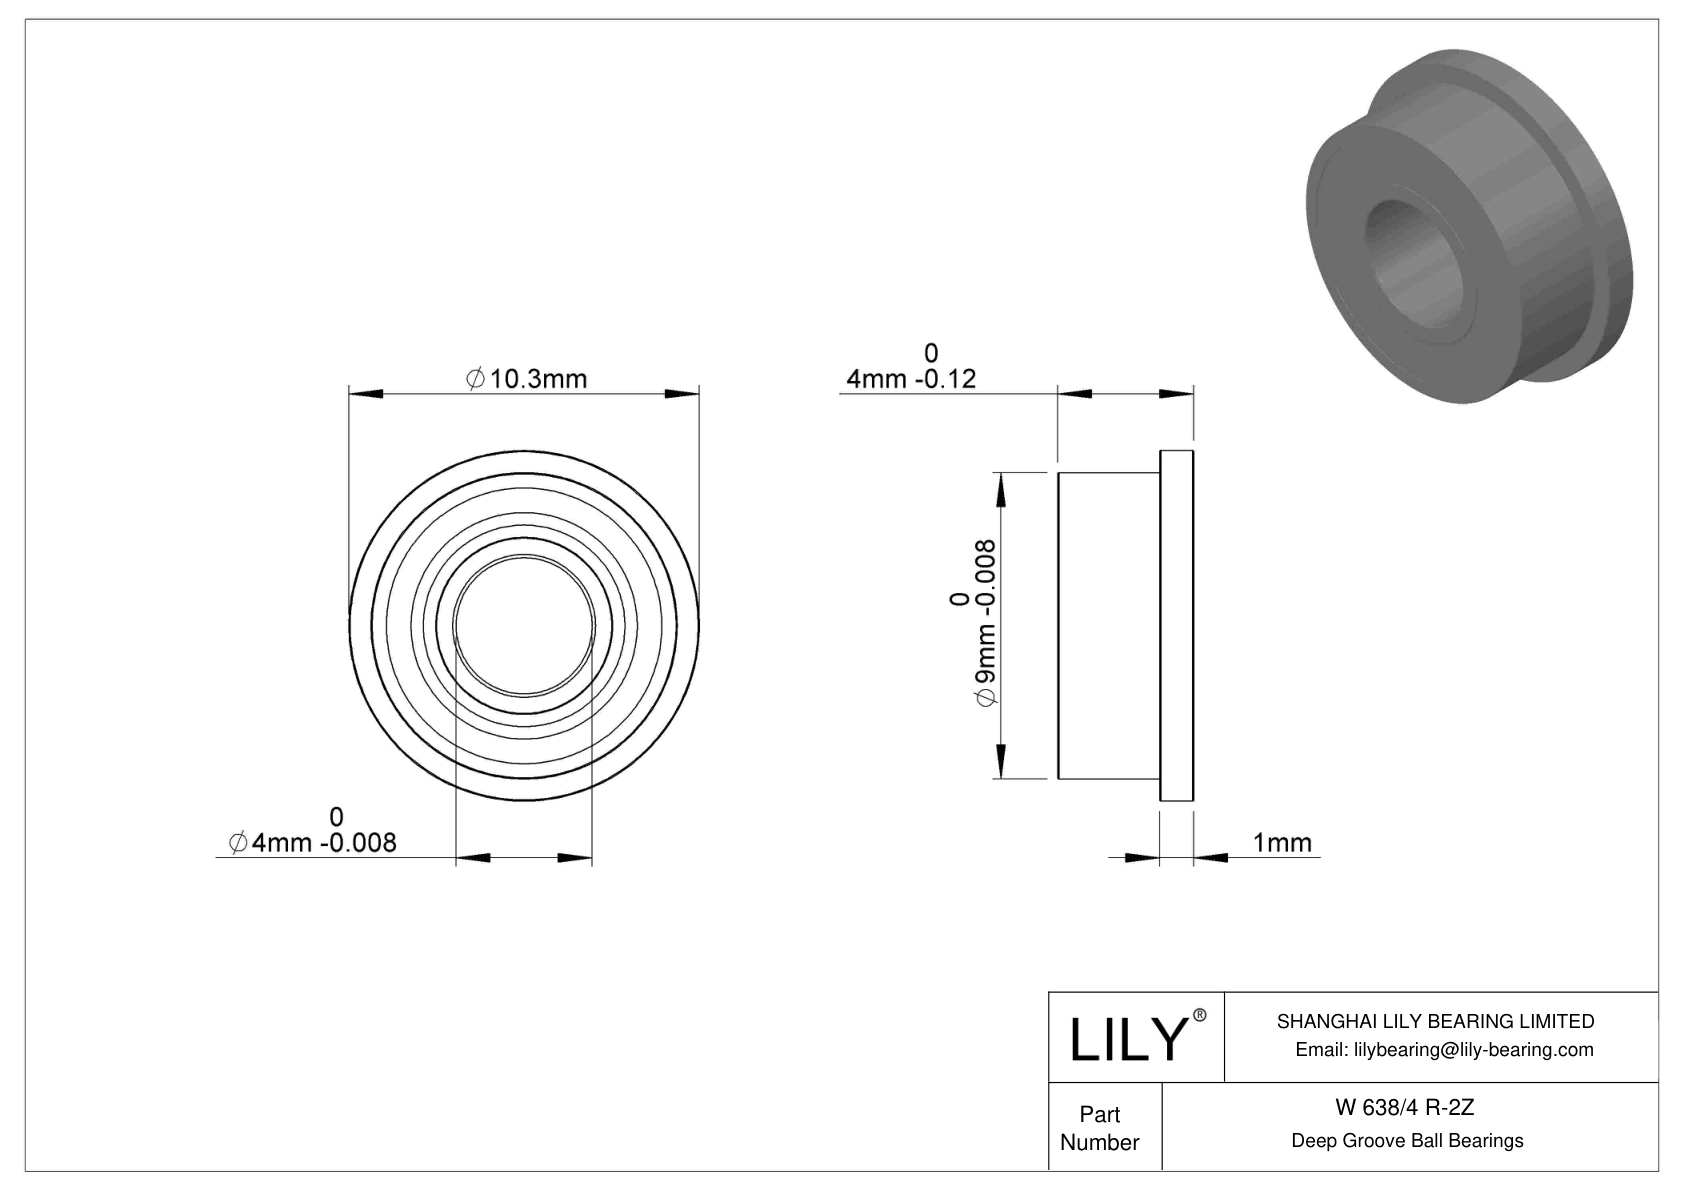 W 638/4 R-2Z Flanged Ball Bearings cad drawing